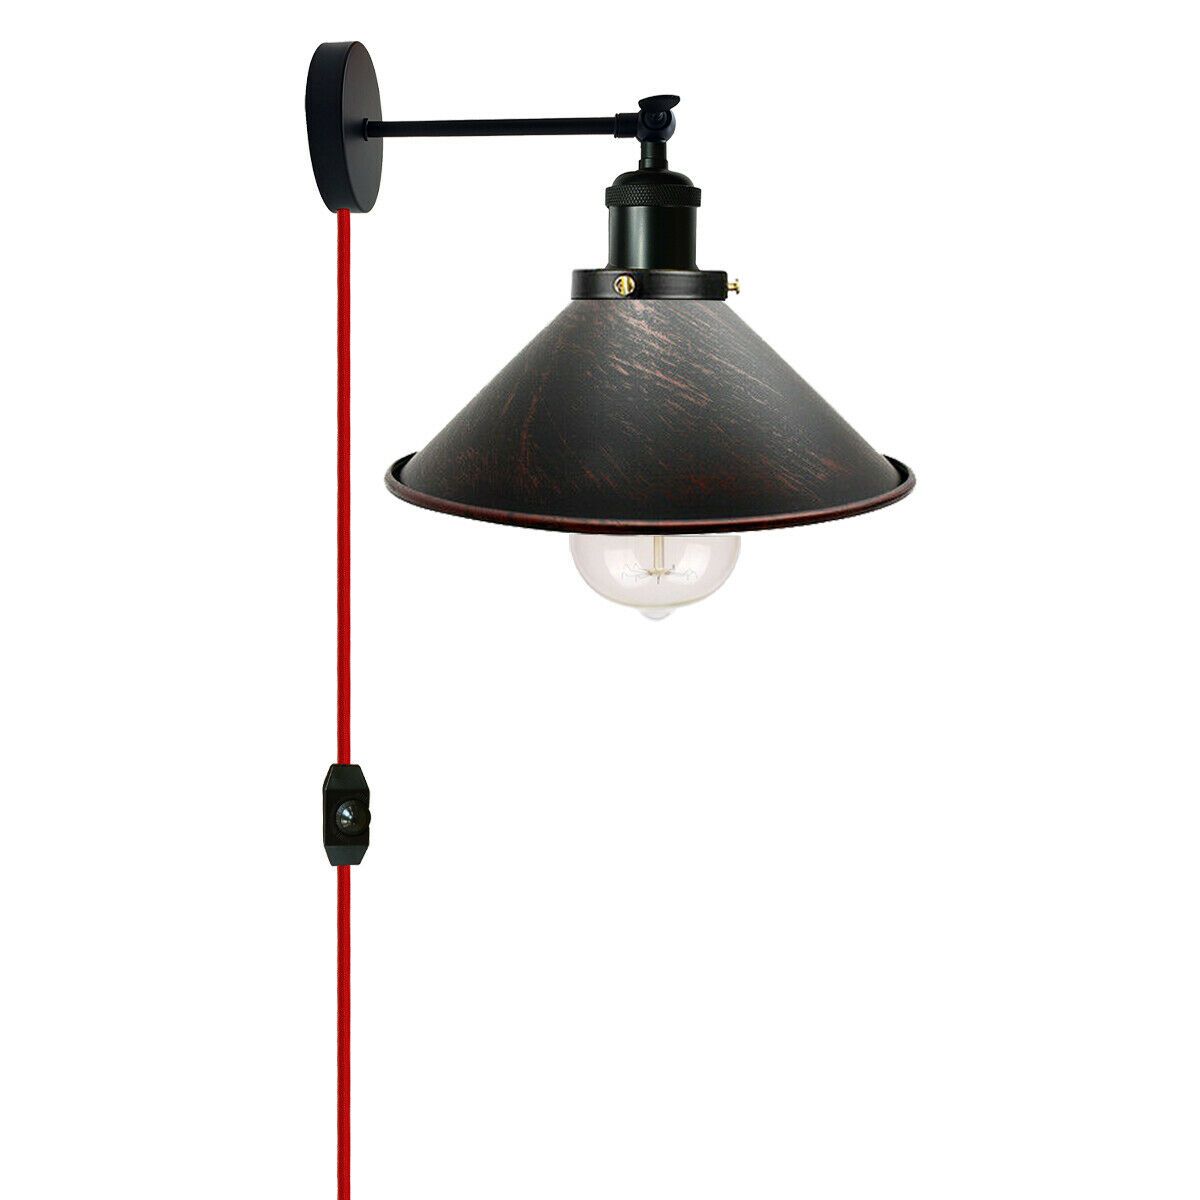 Vintage Black Cone Lamp Shade-E27 Holder & Plug-In Dimmer Switch